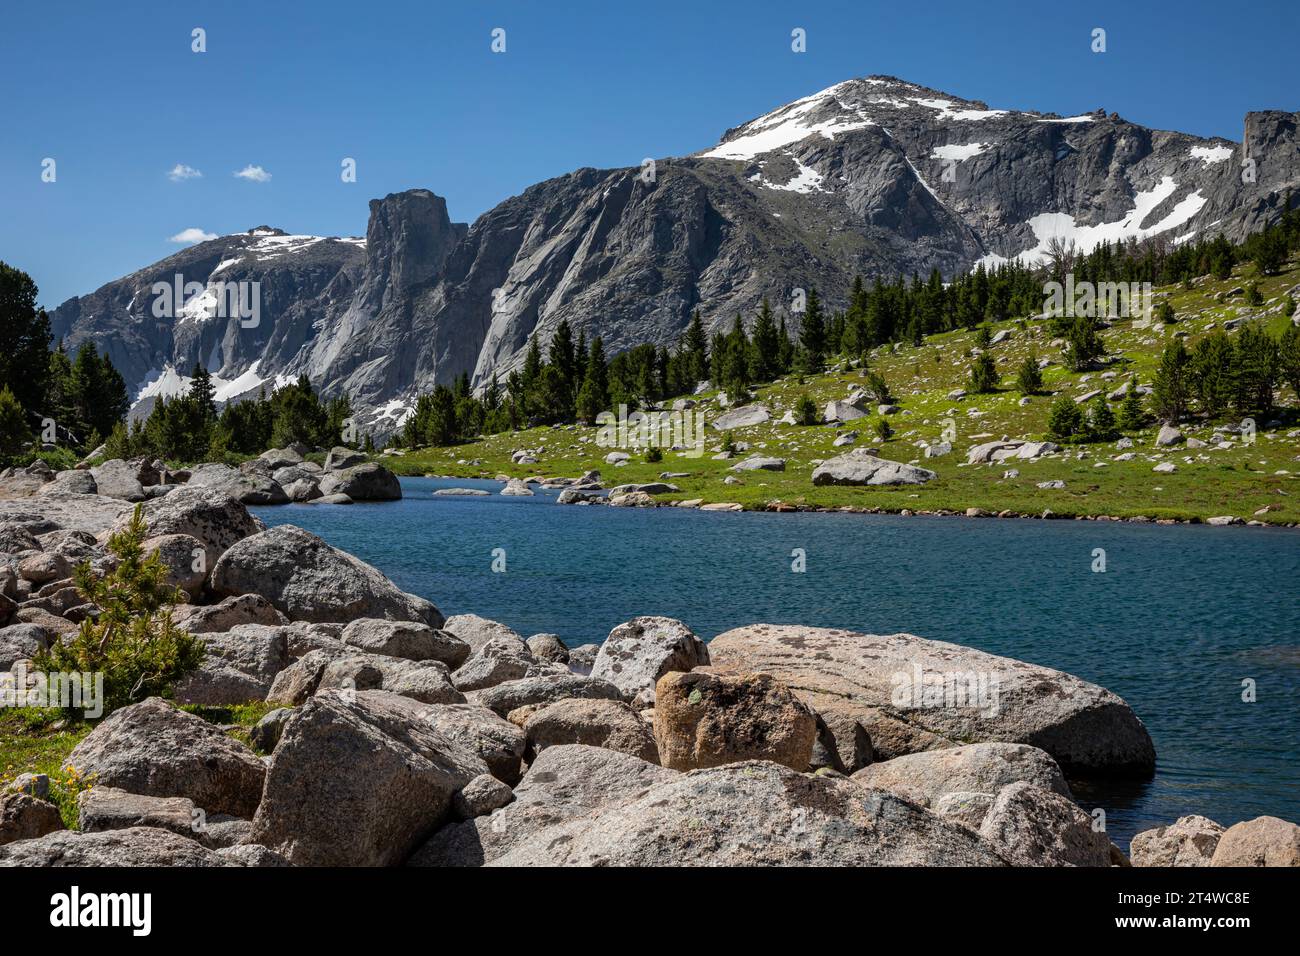 WY05570-00...WYOMING - The Monolith and Dogtooth Mountain from Upper Bear Lake in the Popo Agie Wilderness area. Stock Photo